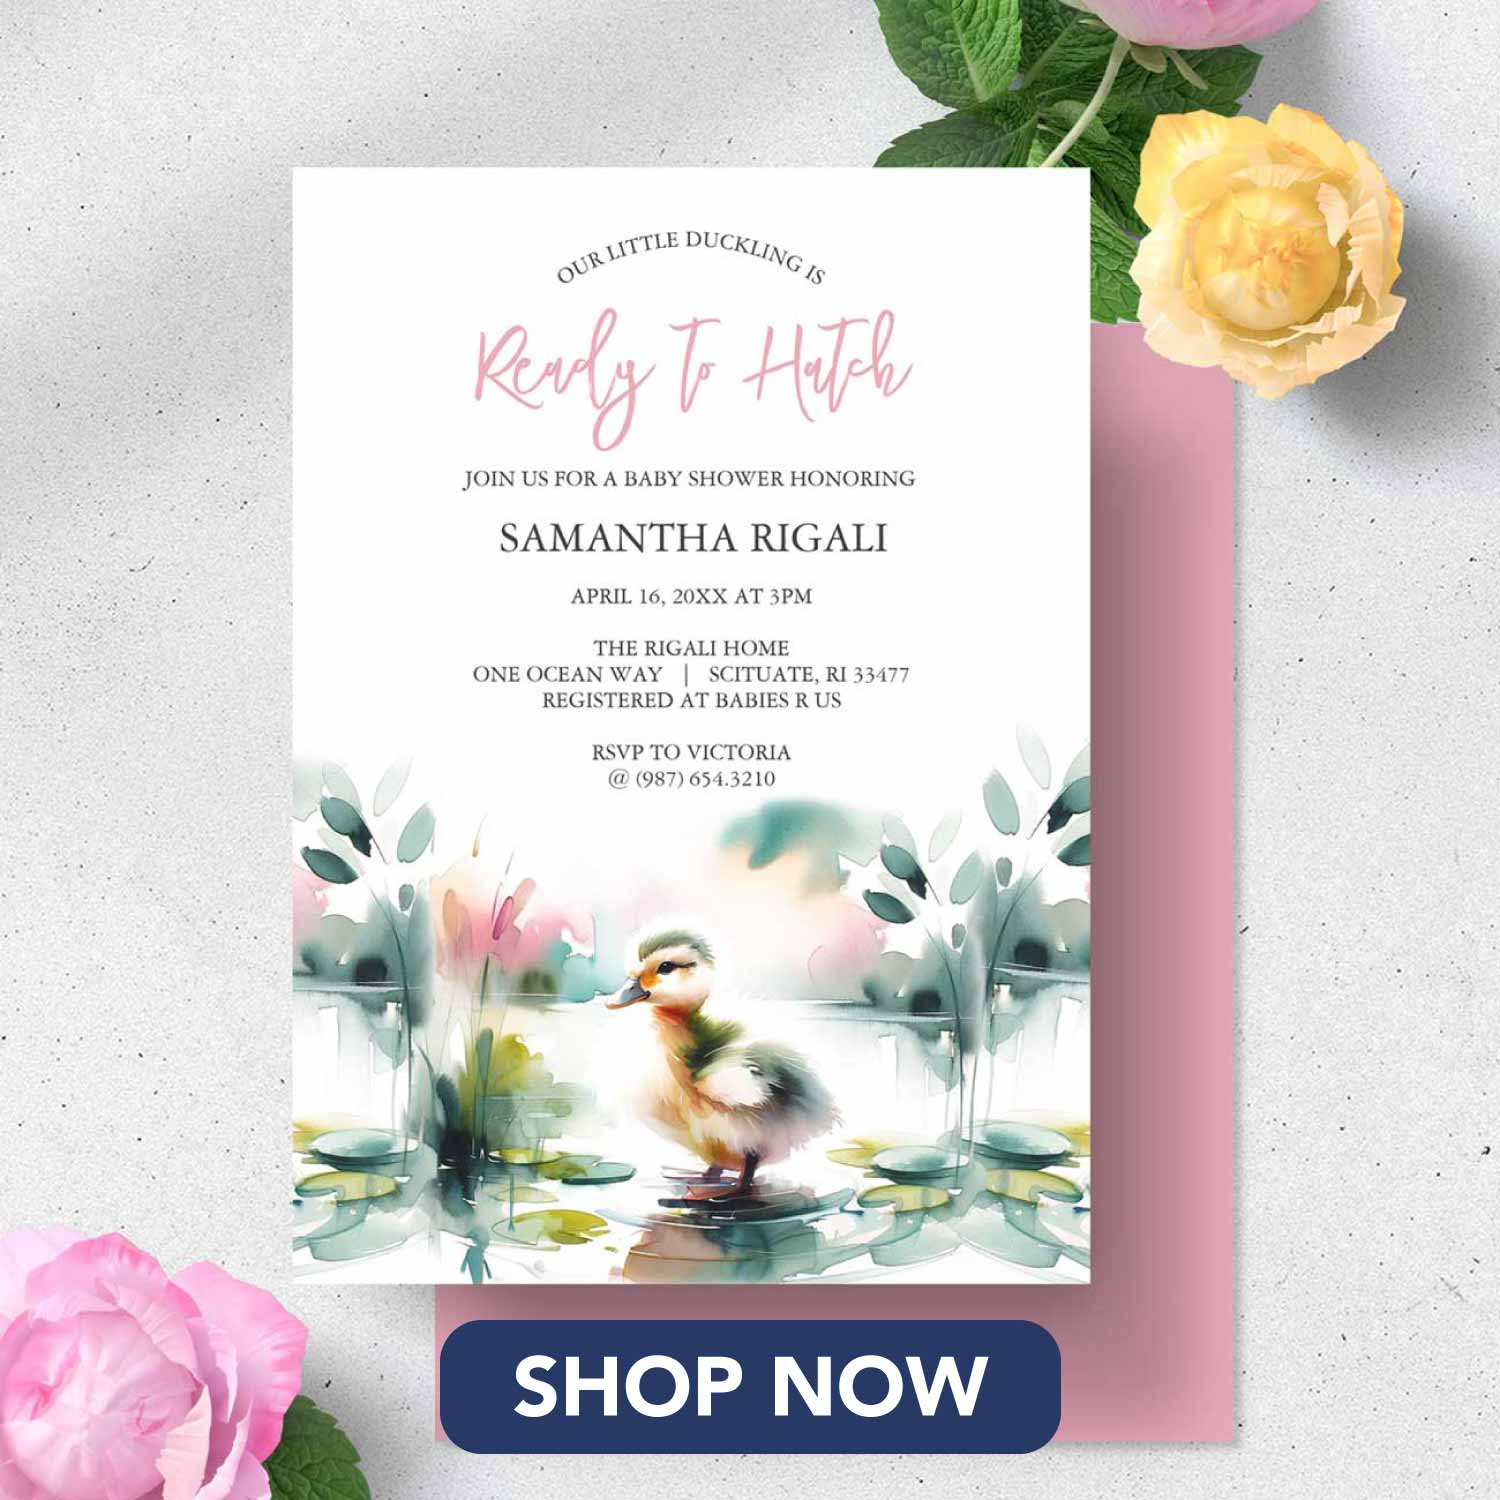 duck baby shower invitations feature a cute watercolor duckling design. Click to shop.